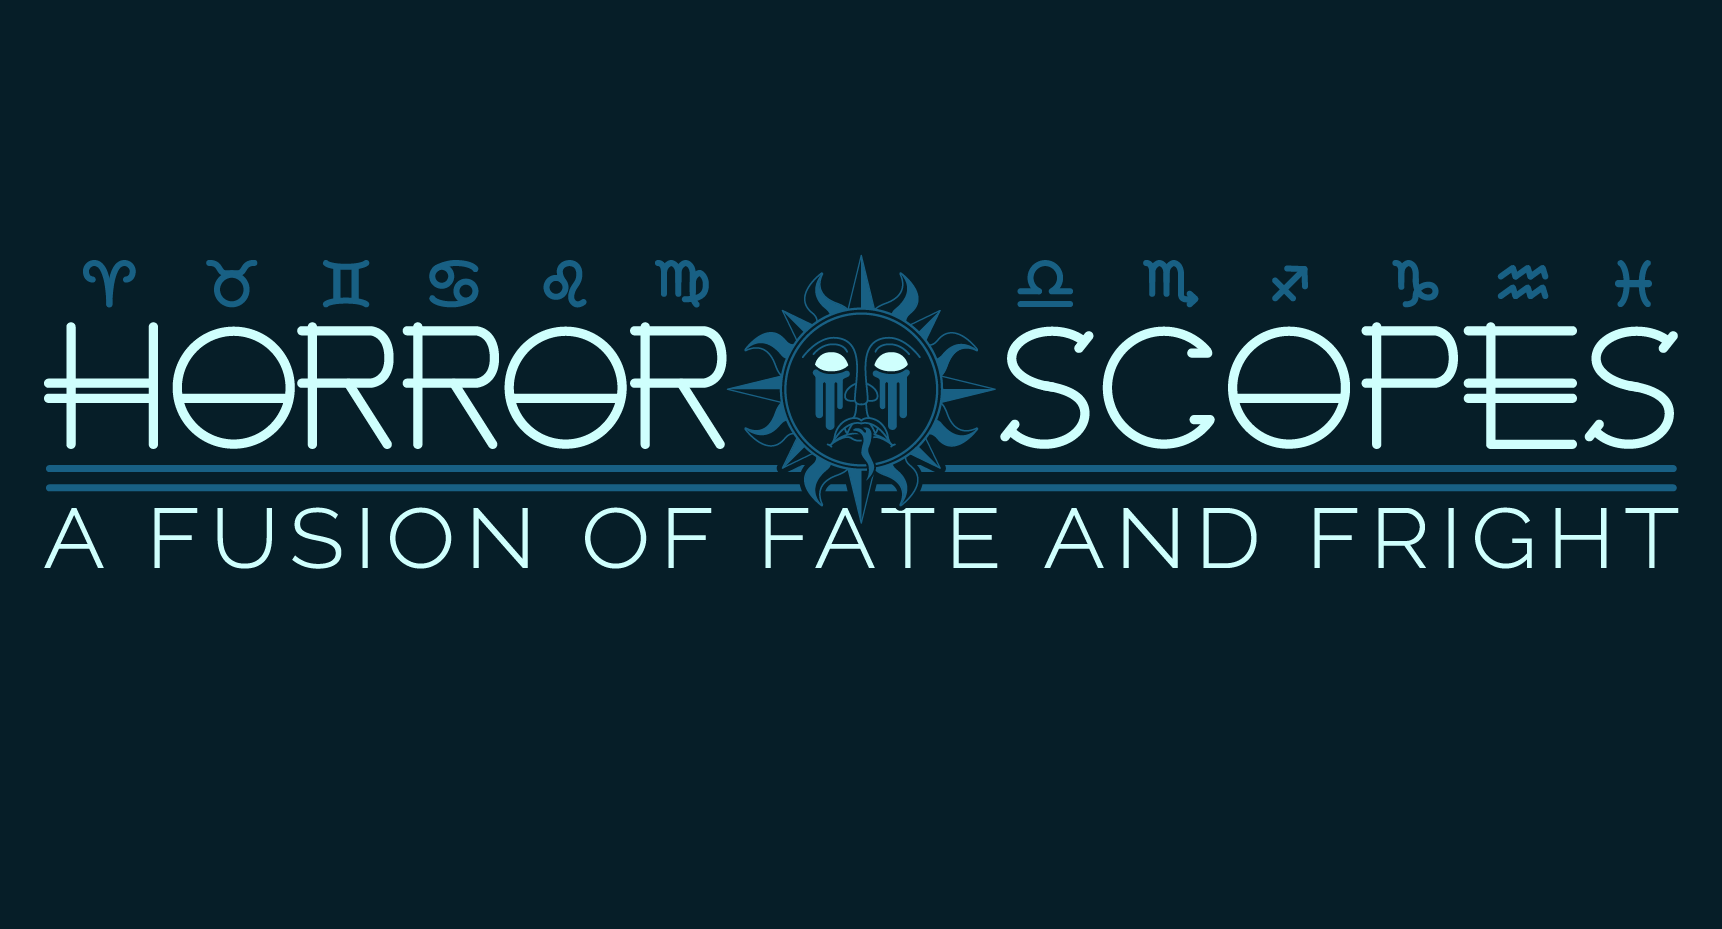 HORROR SCOPES: A FUSION OF FATE AND FRIGHT